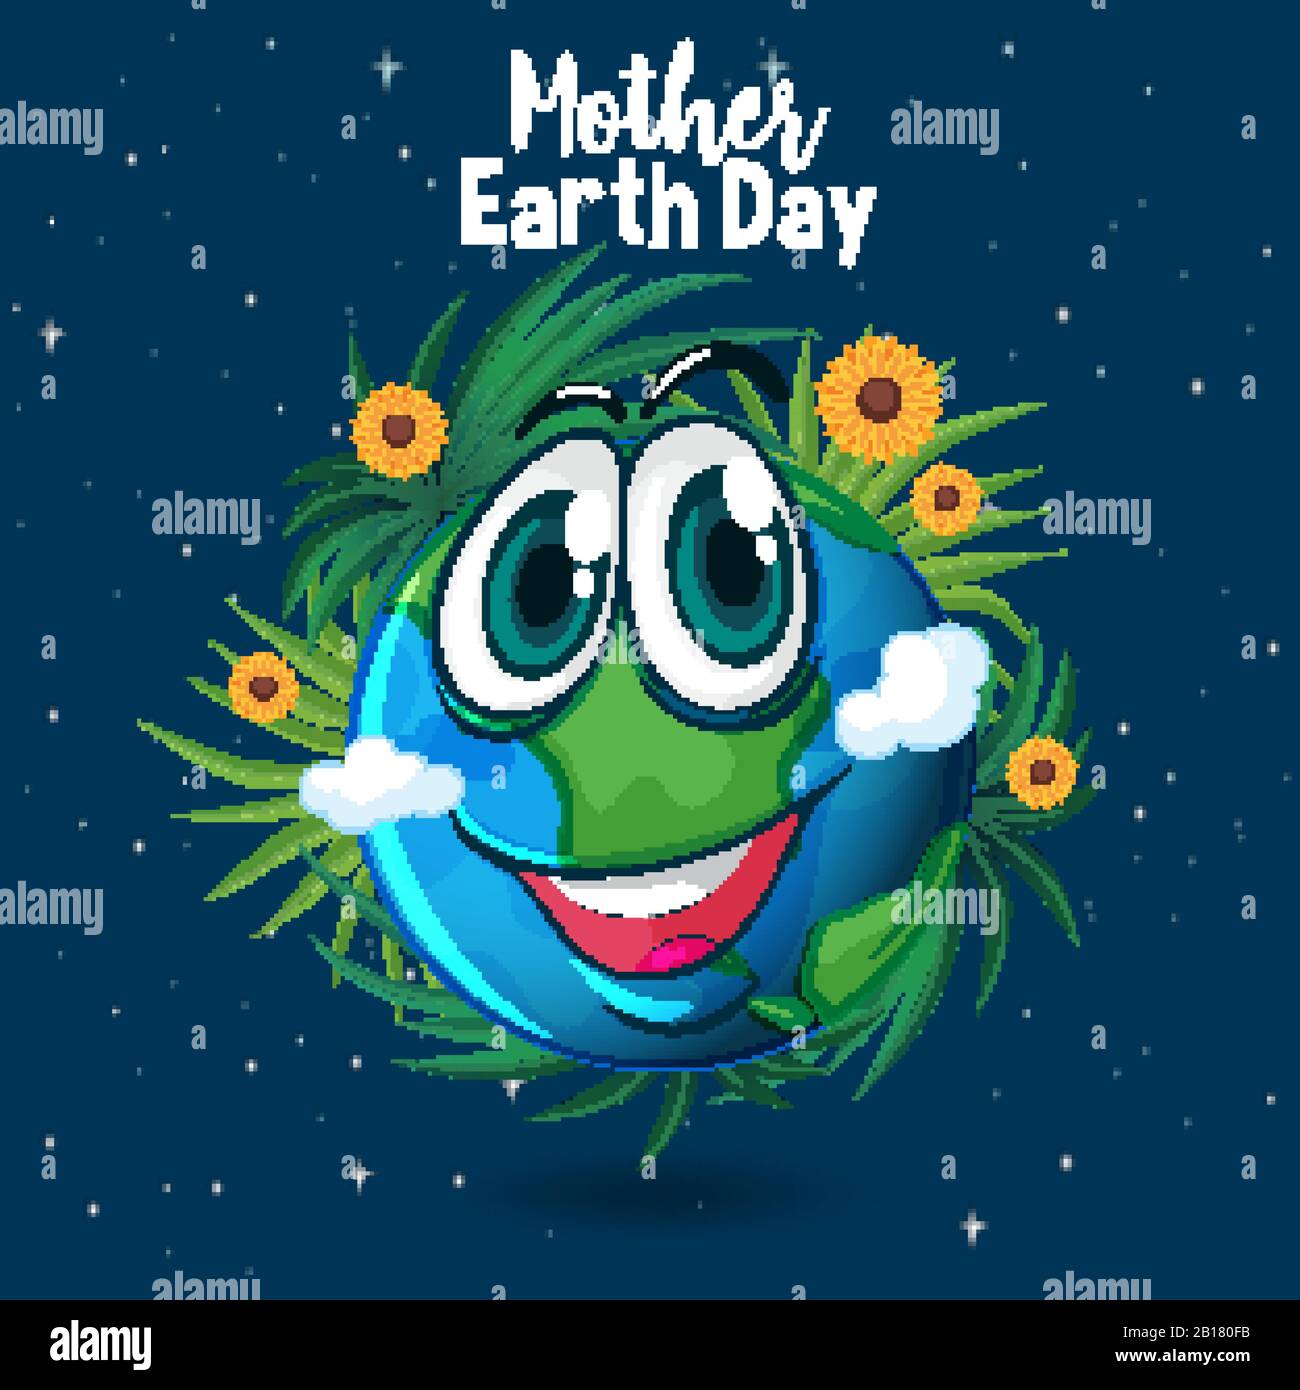 Poster design for mother earth day with happy smile on earth illustration Stock Vector